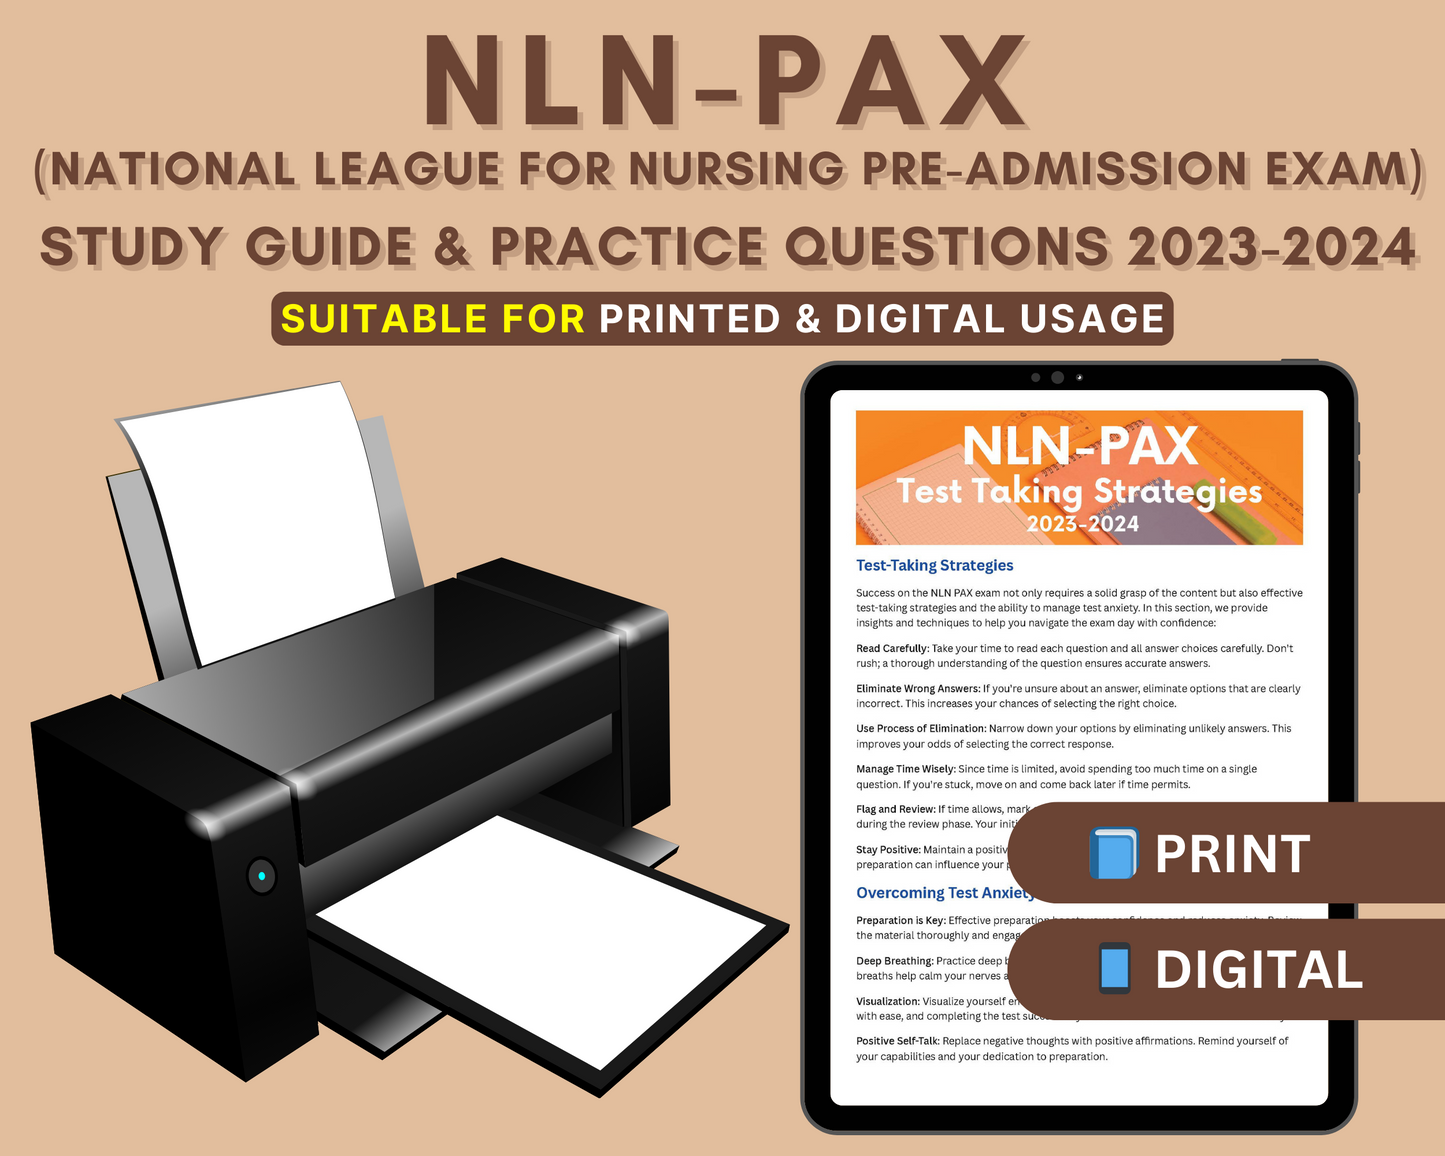 NLN PAX Study Guide 2023-2024: Practice Questions, Detailed Answers & Strategies for Nursing School Entrance Exam and Allied Health Excellence